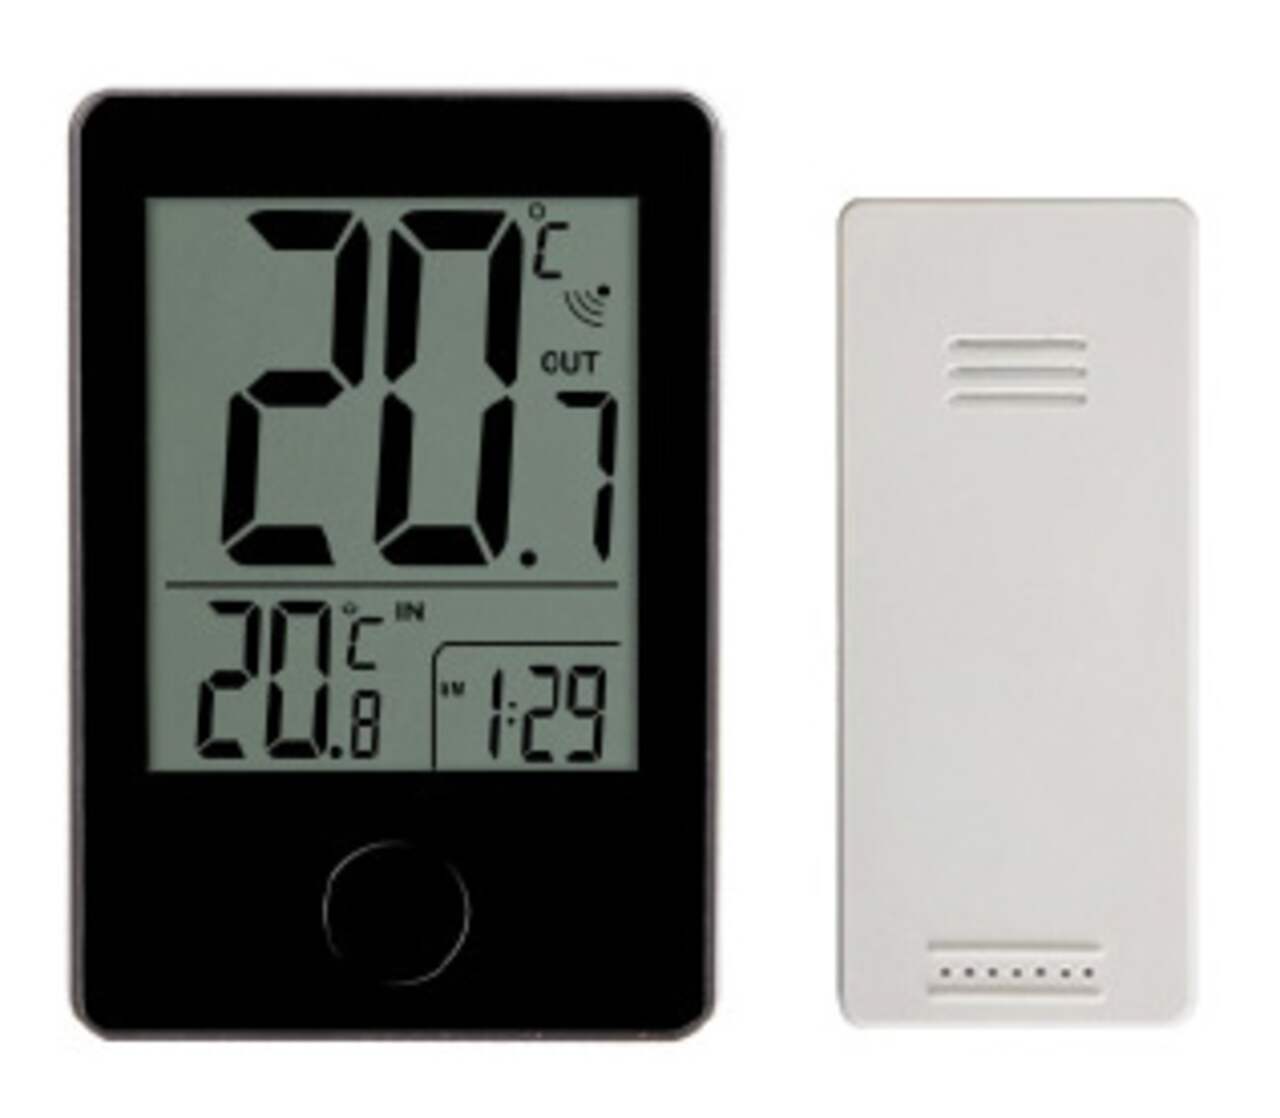 https://media-www.canadiantire.ca/product/living/kitchen/kitchen-tools-thermometers/1422471/wireless-thermometer-with-clock-6222703d-9174-47ed-90d4-4745c2275c4d.png?imdensity=1&imwidth=640&impolicy=mZoom